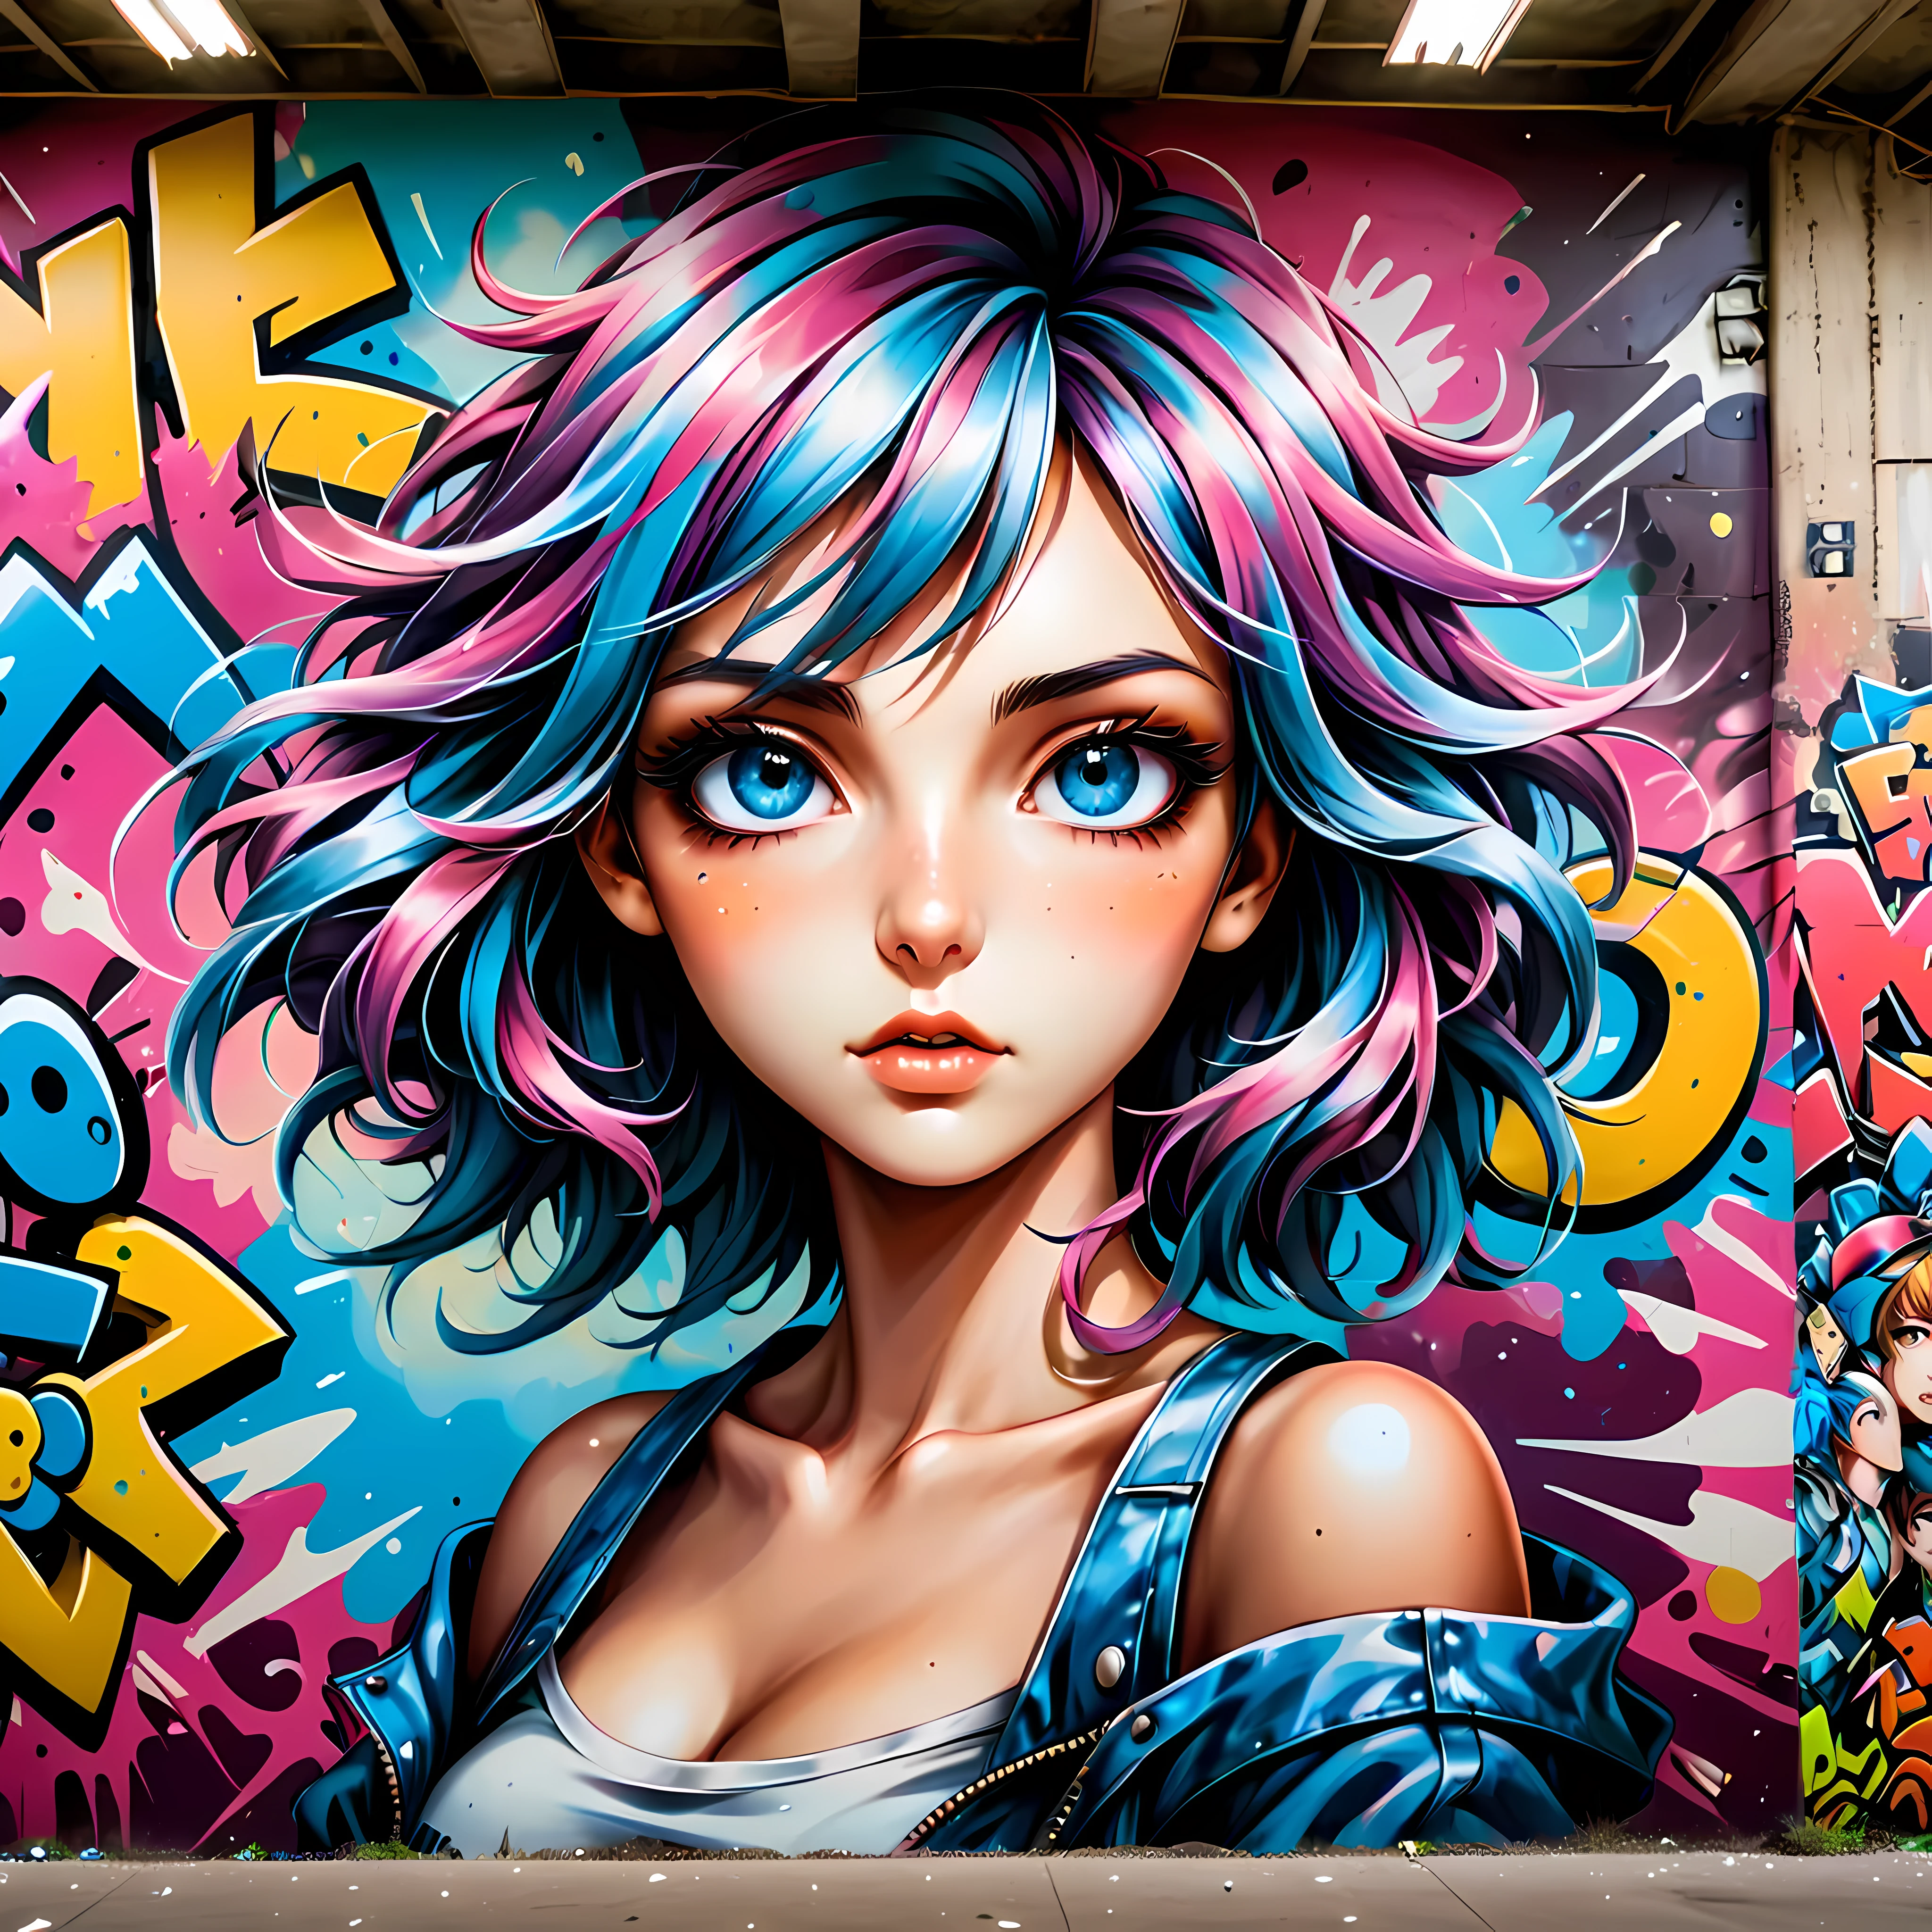 A mural of graffiti comic in a building wall.

(best quality,realistic),(close-up),(anime artwork:1.1),(mural),(venus 5 style:1.1),(90s anime style:1.1),(vibrant colors),(detailed characteragical atmosphere),(soft lighting),(nostalgic),(dynamic poses),(expressive eyes:1.1),(beautiful hairstyles),(playful expressions),(whimsical background),(eye-catching),(colorful composition)